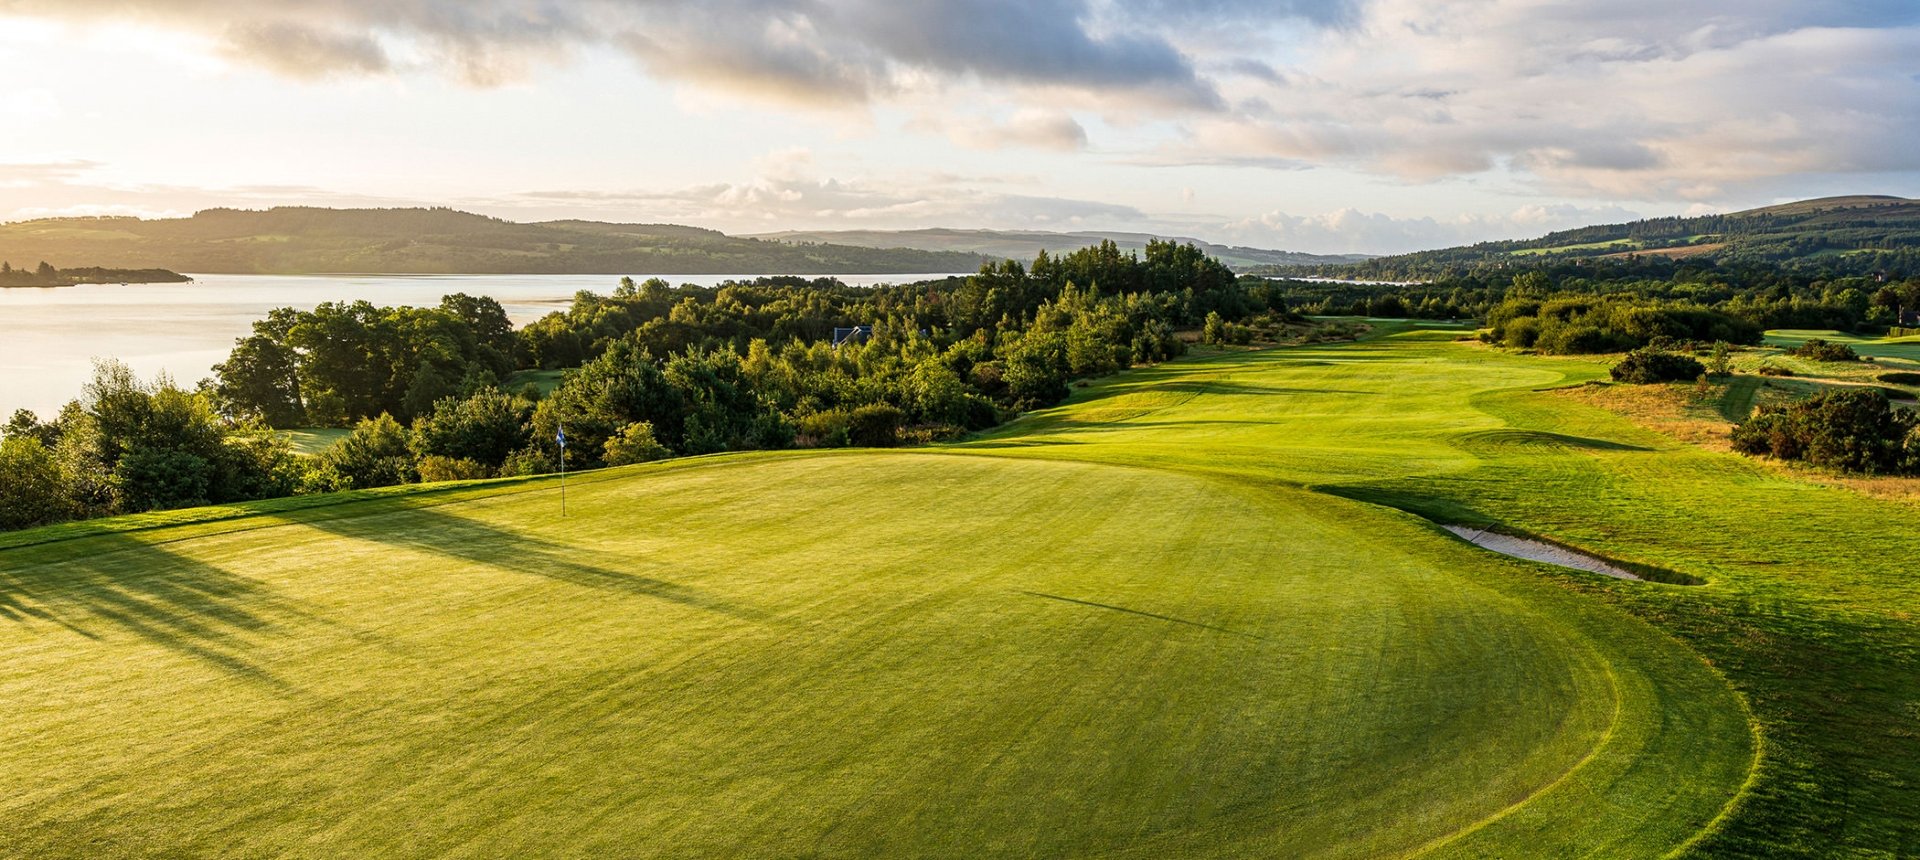 birds eye view of a golf course next to a large body of water with clouds in the sky